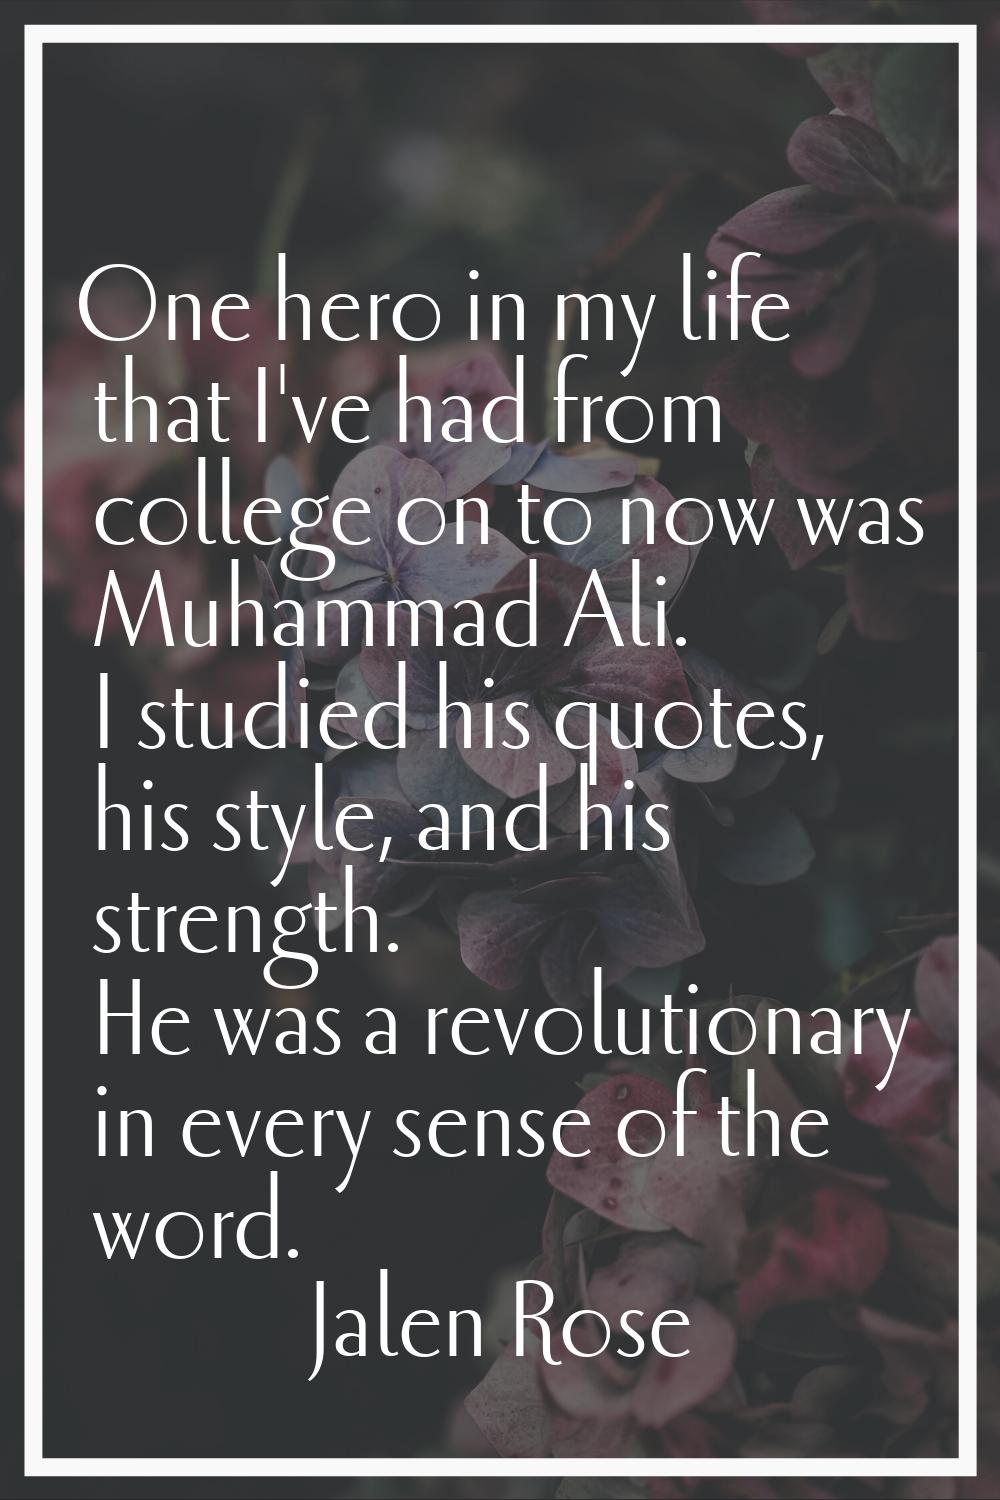 One hero in my life that I've had from college on to now was Muhammad Ali. I studied his quotes, hi